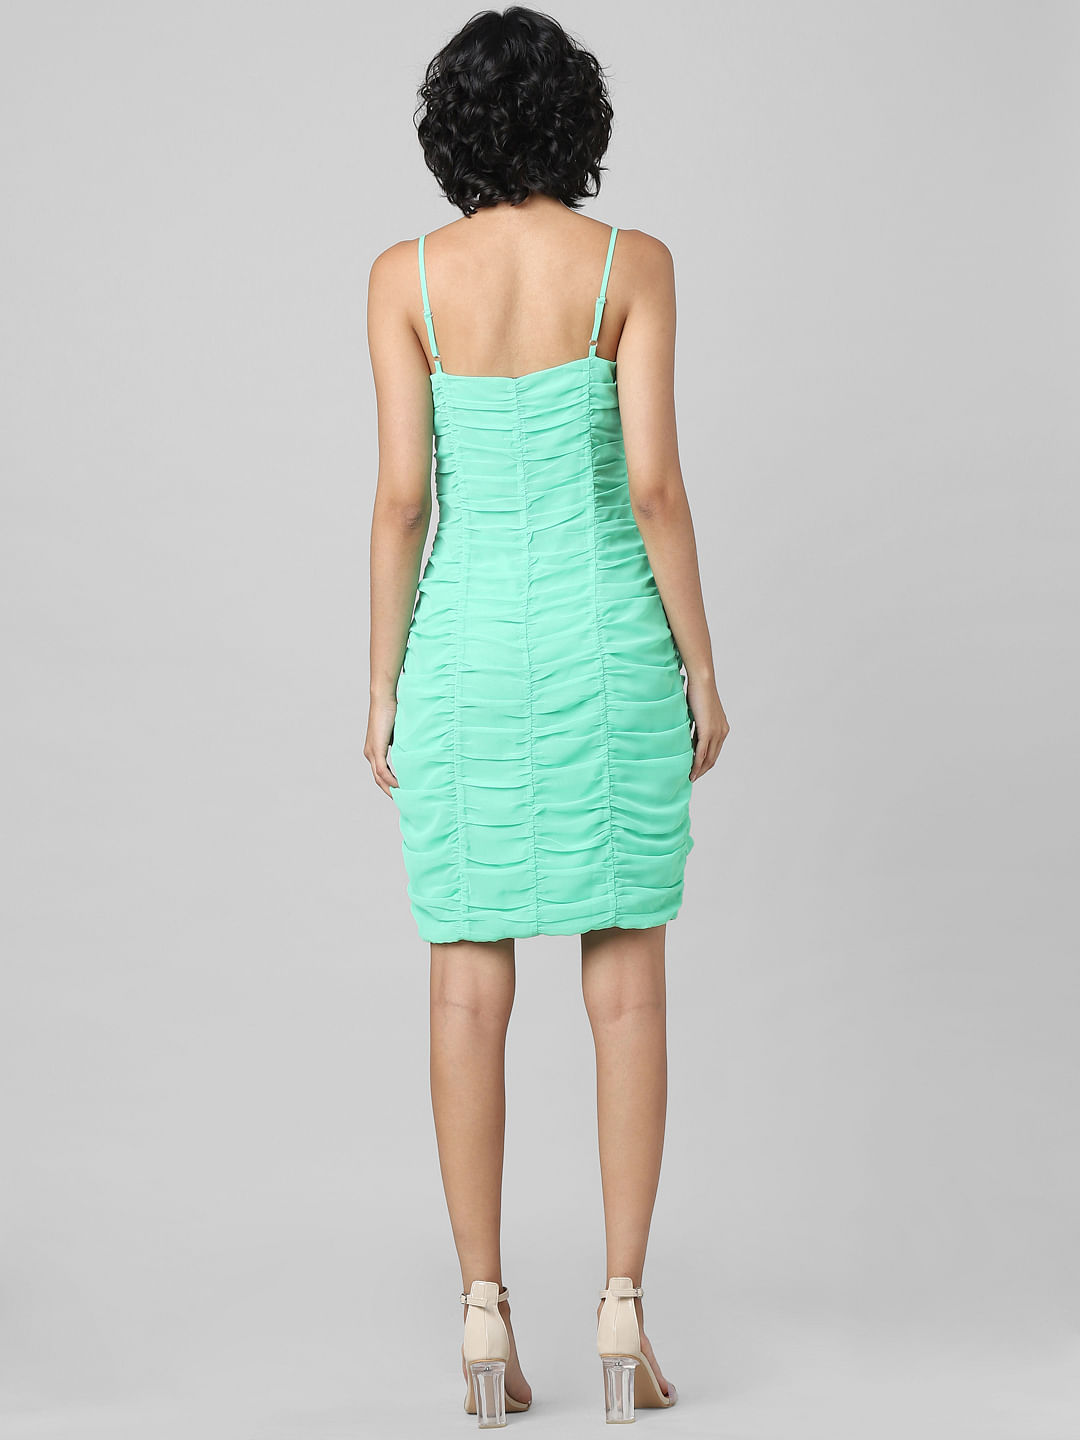 Green Ruched Bodycon Dress